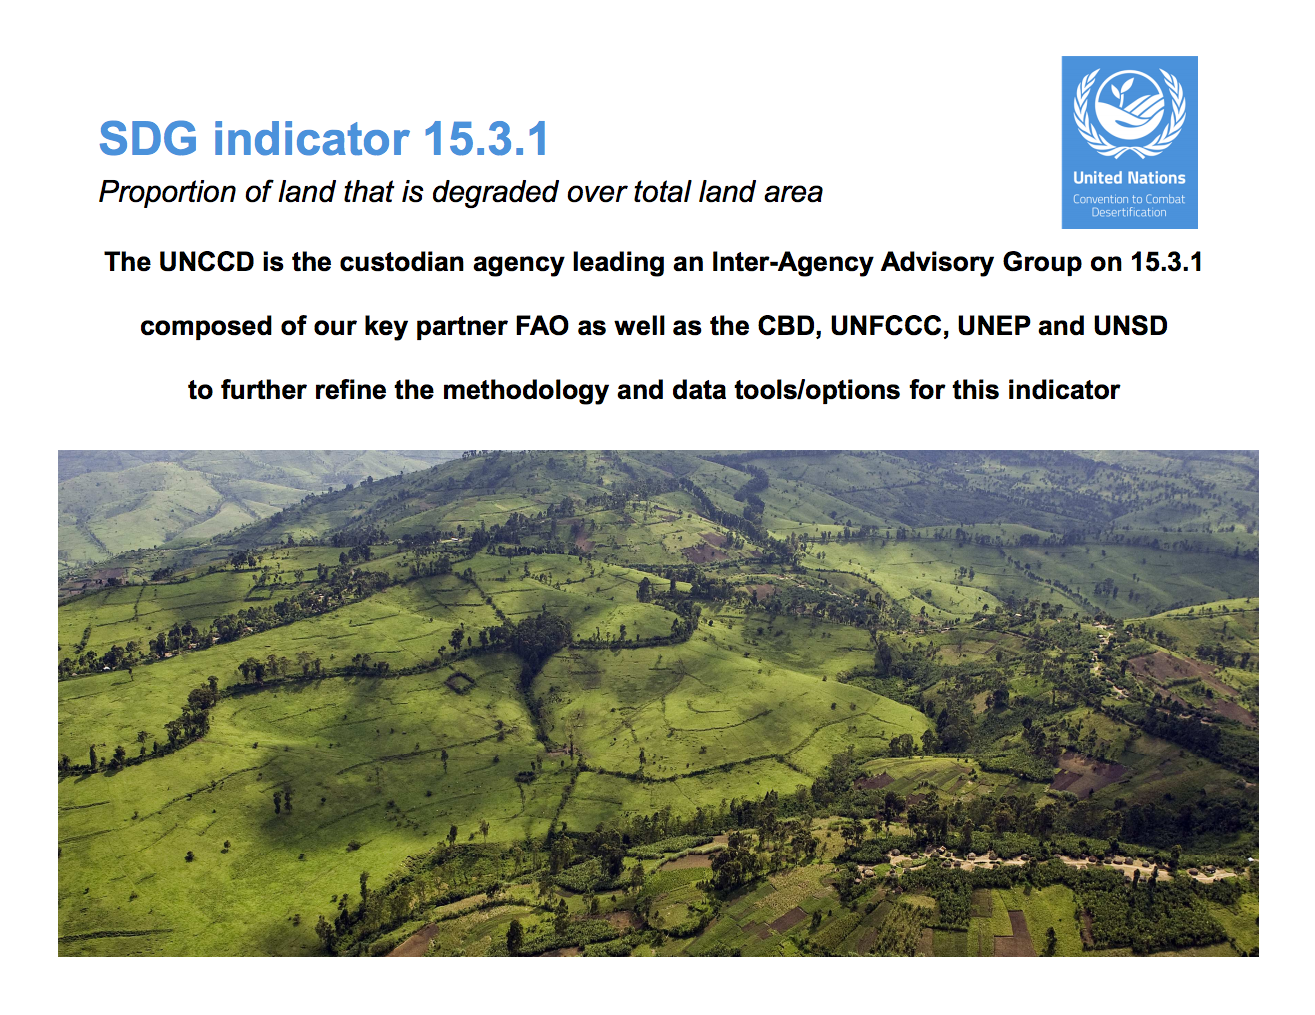 SDG indicator 15.3.1: Proportion of land that is degraded over total land area cover image